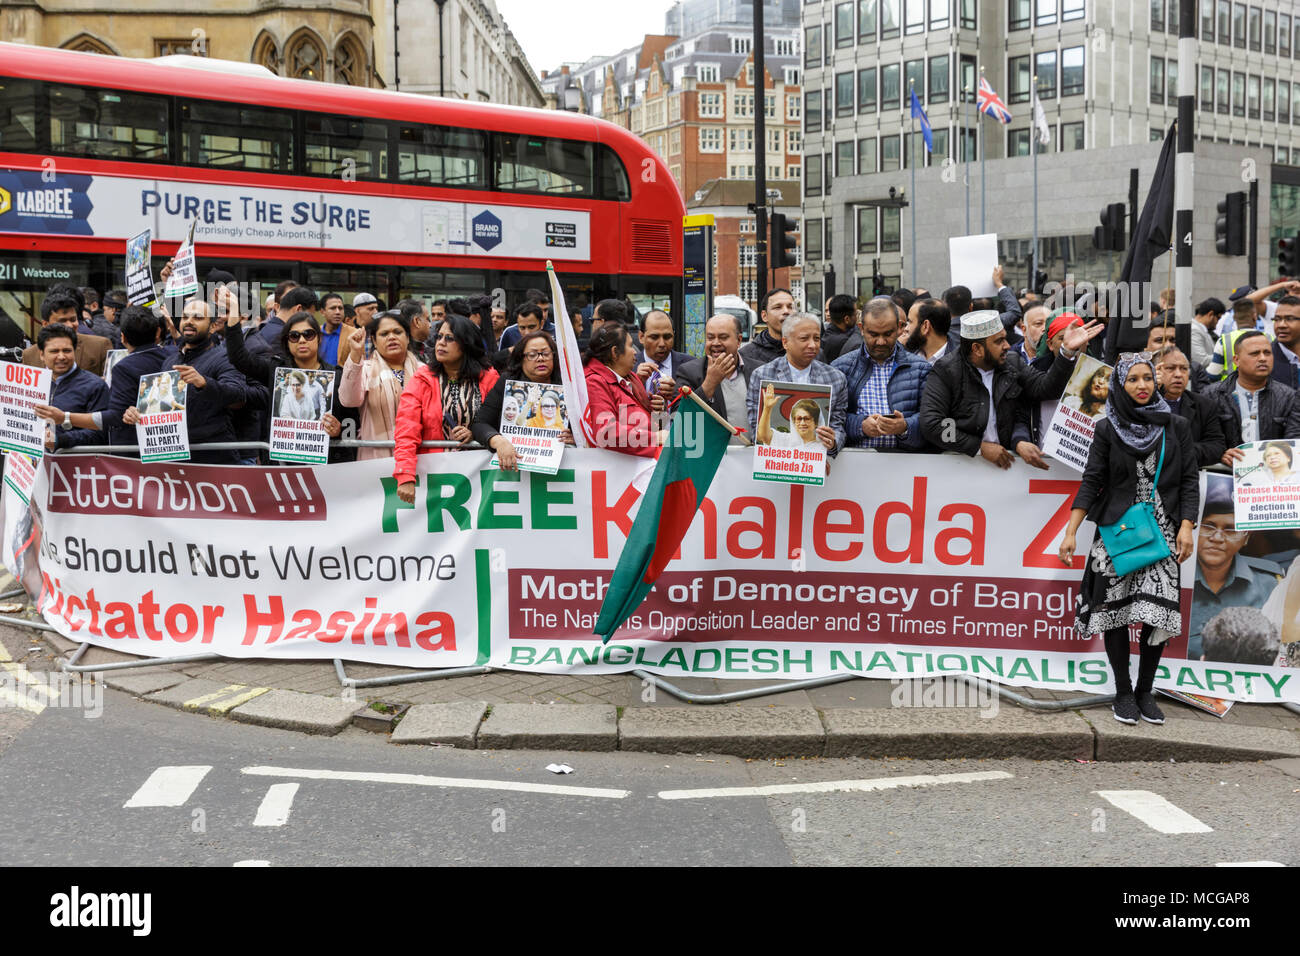 Westminster, London, 16th April 2018. Members of the Bangladeshi community demonstrate near the site of the Commonwealth meetings, rallying for democratic elections in Bangladesh and for the main opposition party, the Bangladesh Nationalist Party led by three-time former Prime Minister Khaleda Zia Credit: Imageplotter News and Sports/Alamy Live News Stock Photo